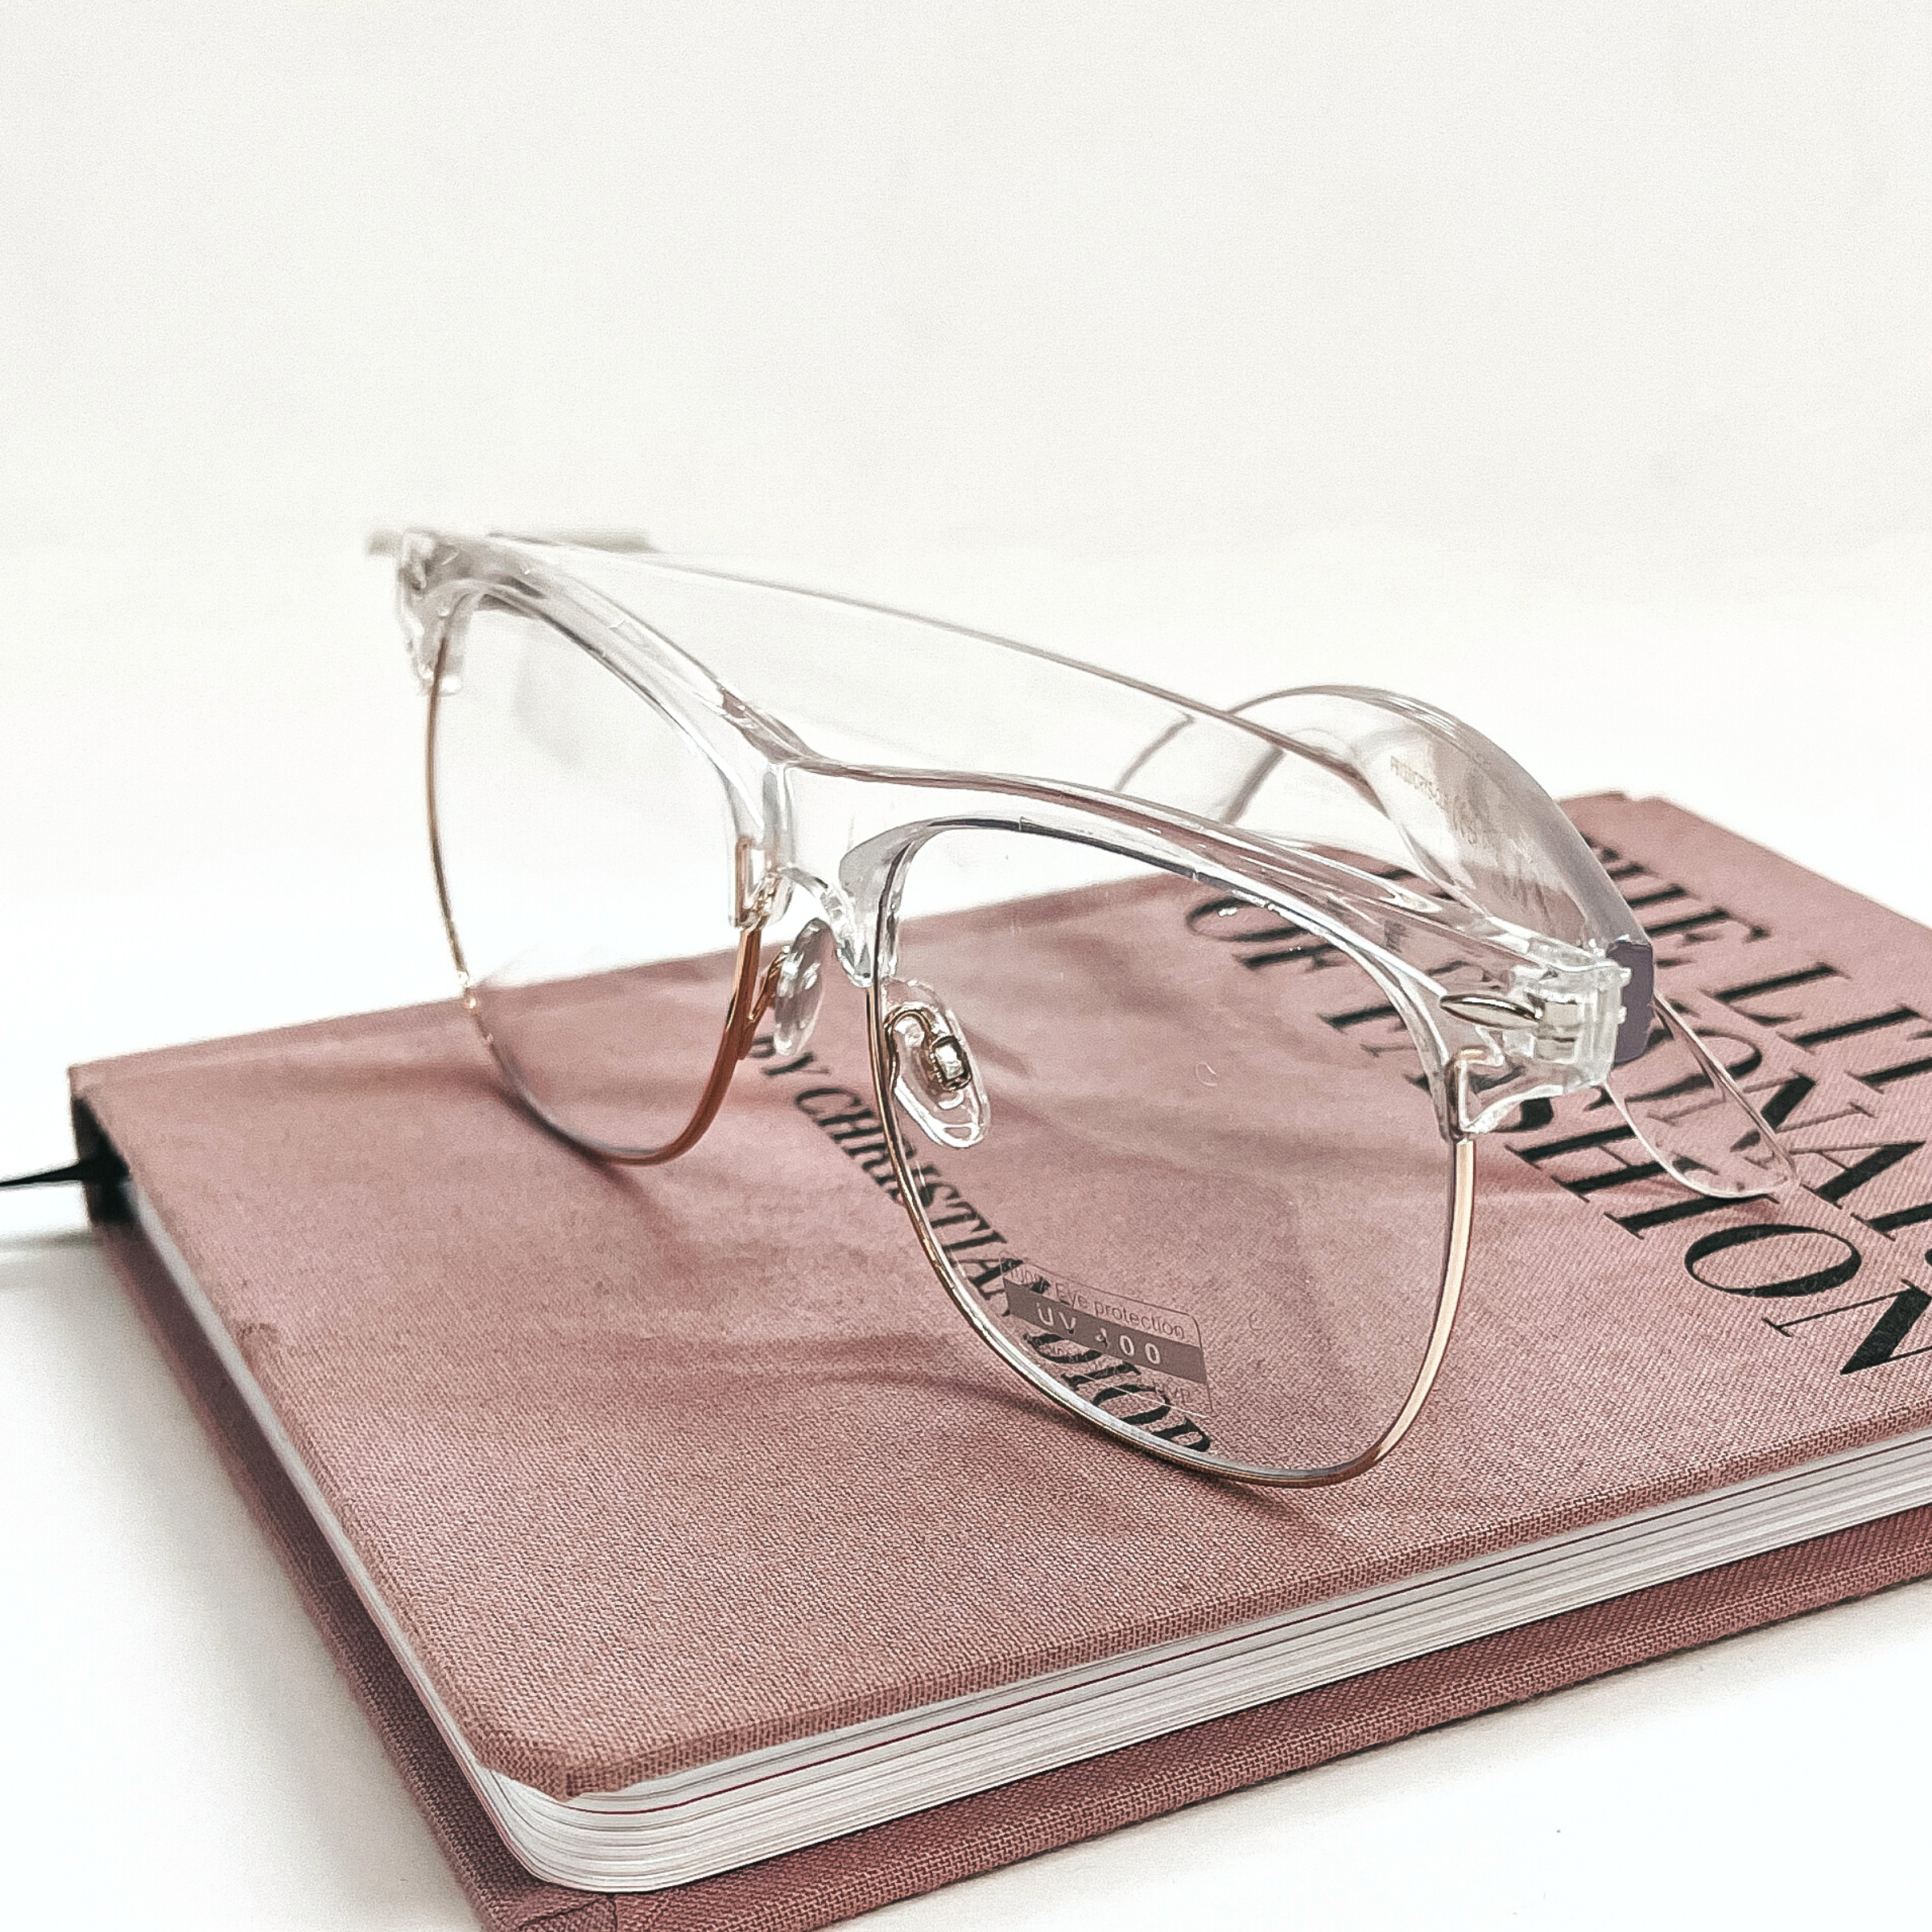 These are clear frame glasses with clear lenses and a rose gold outline in the bottom. These glasses are taken on a pink/purple fashion book and on a white background.